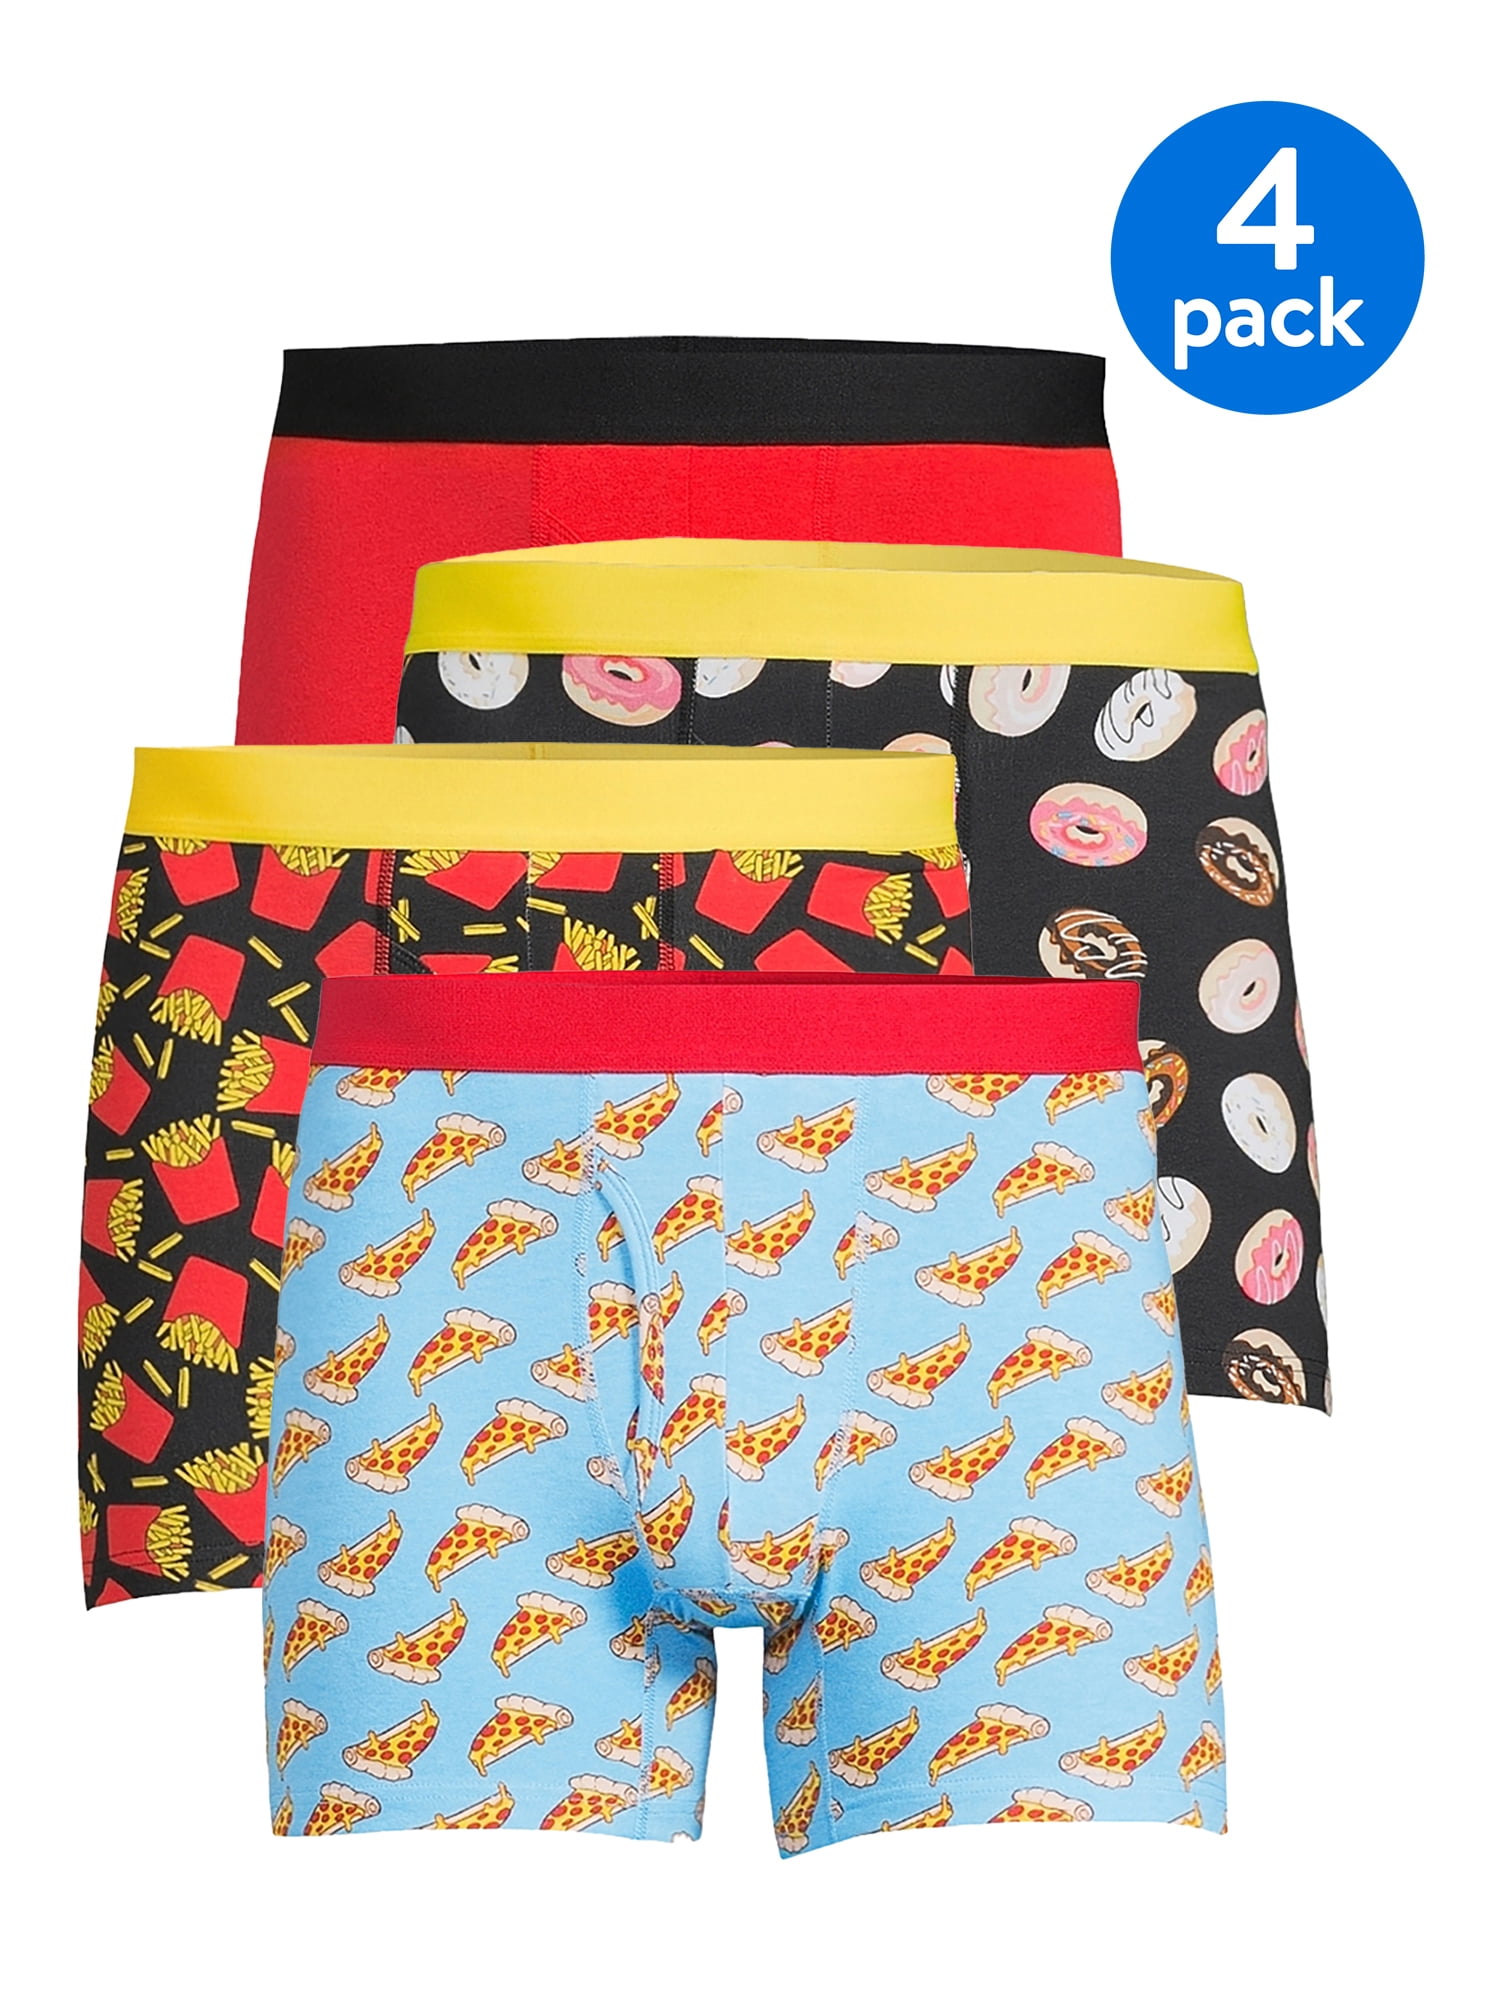 Men's Boo 3 Pack Boxer/Shorts Hipster/Underwear/Brief Cannabis Leaf Boxer Trunks 